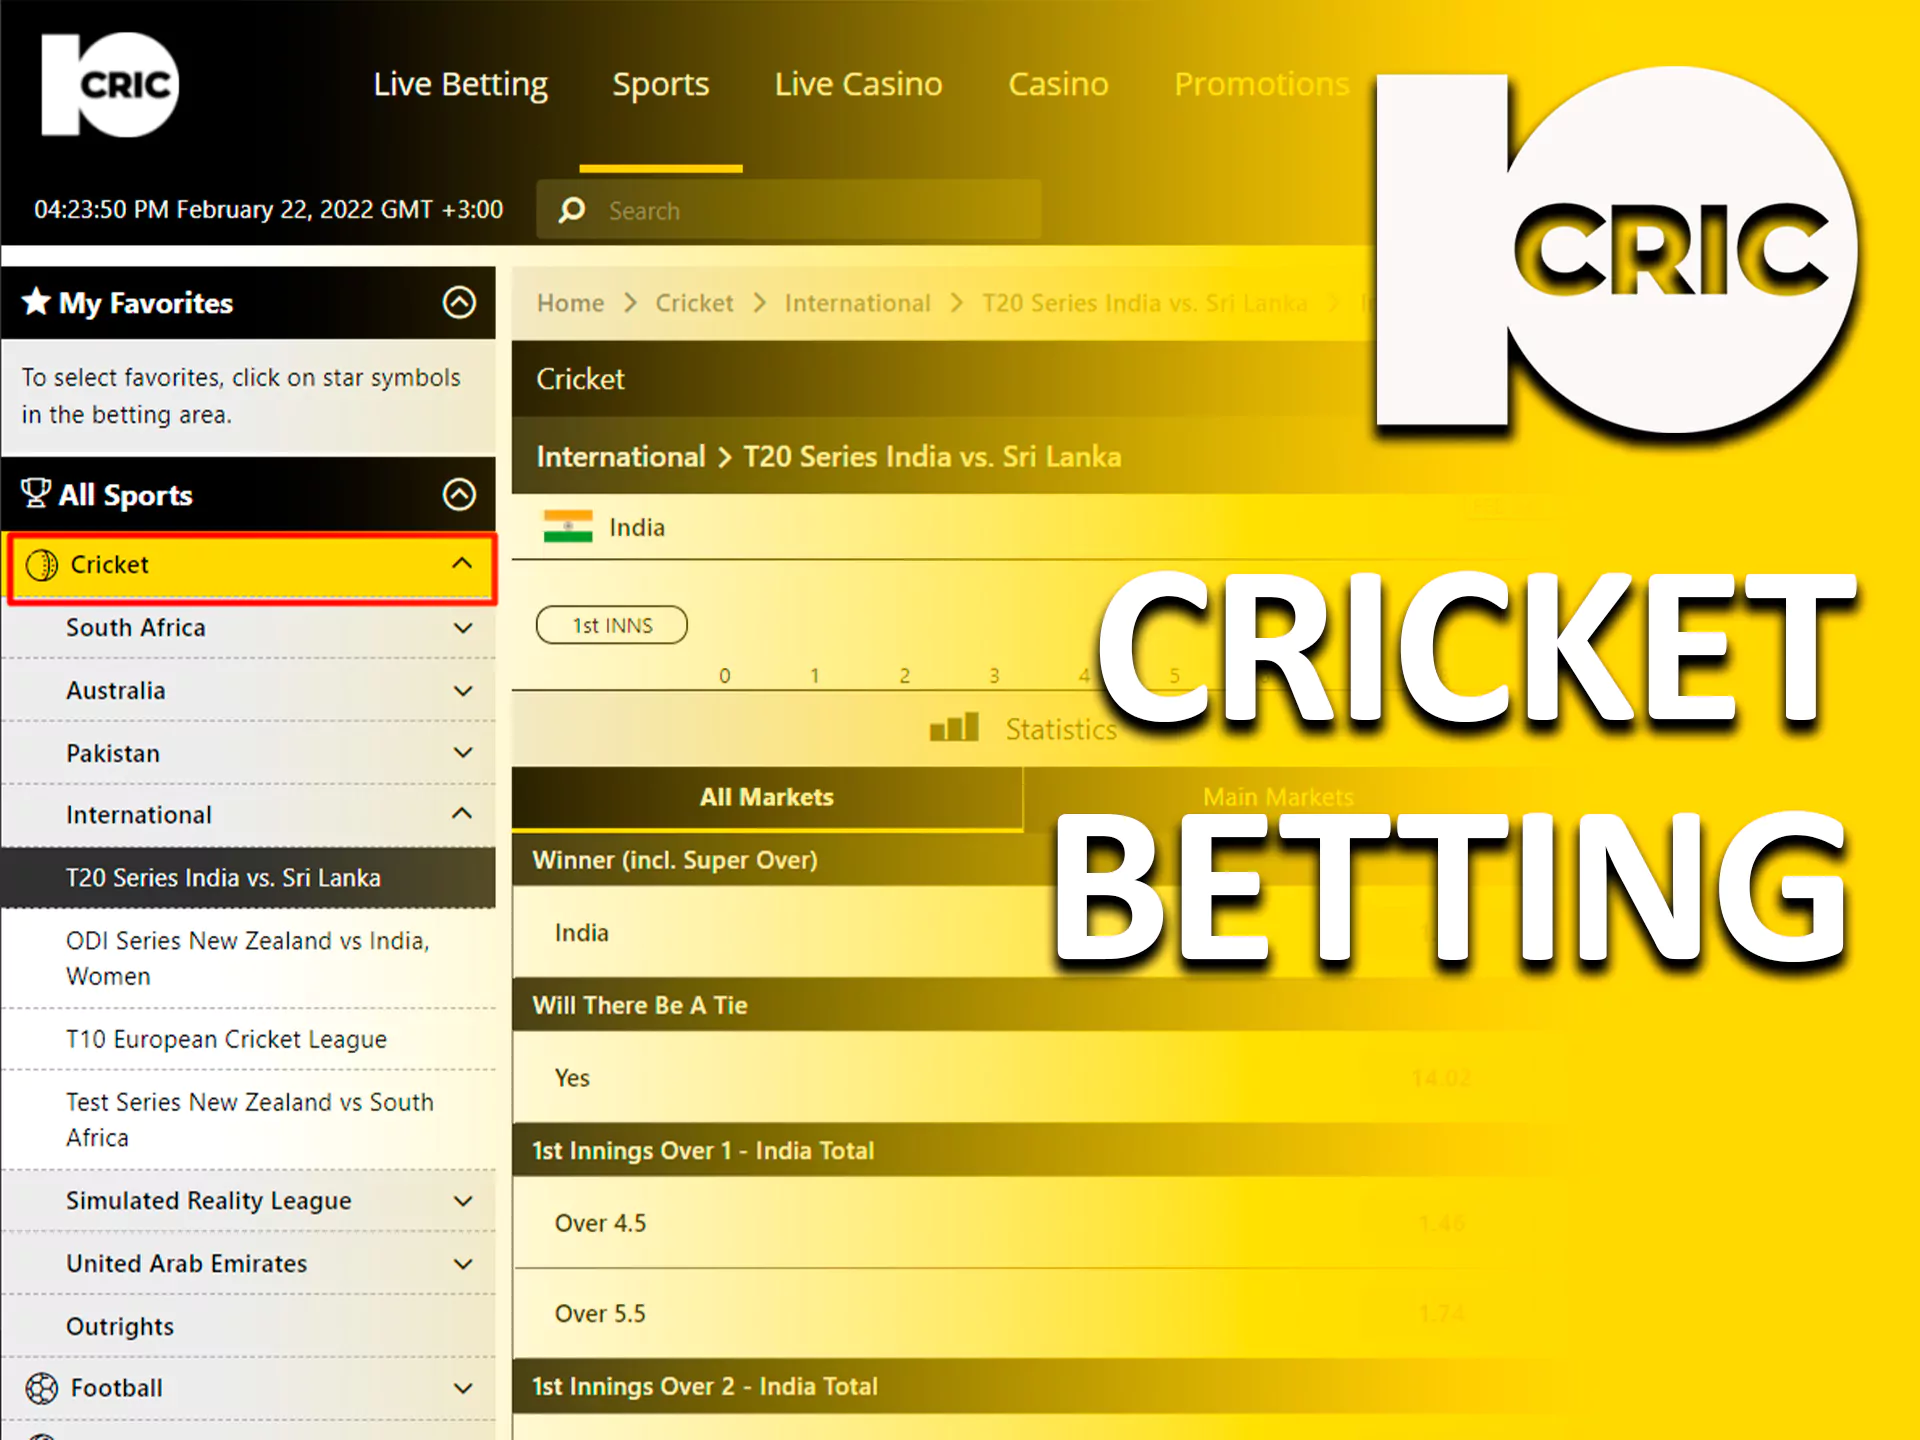 Place bets on the cricket teams in the 10cric sportsbook.